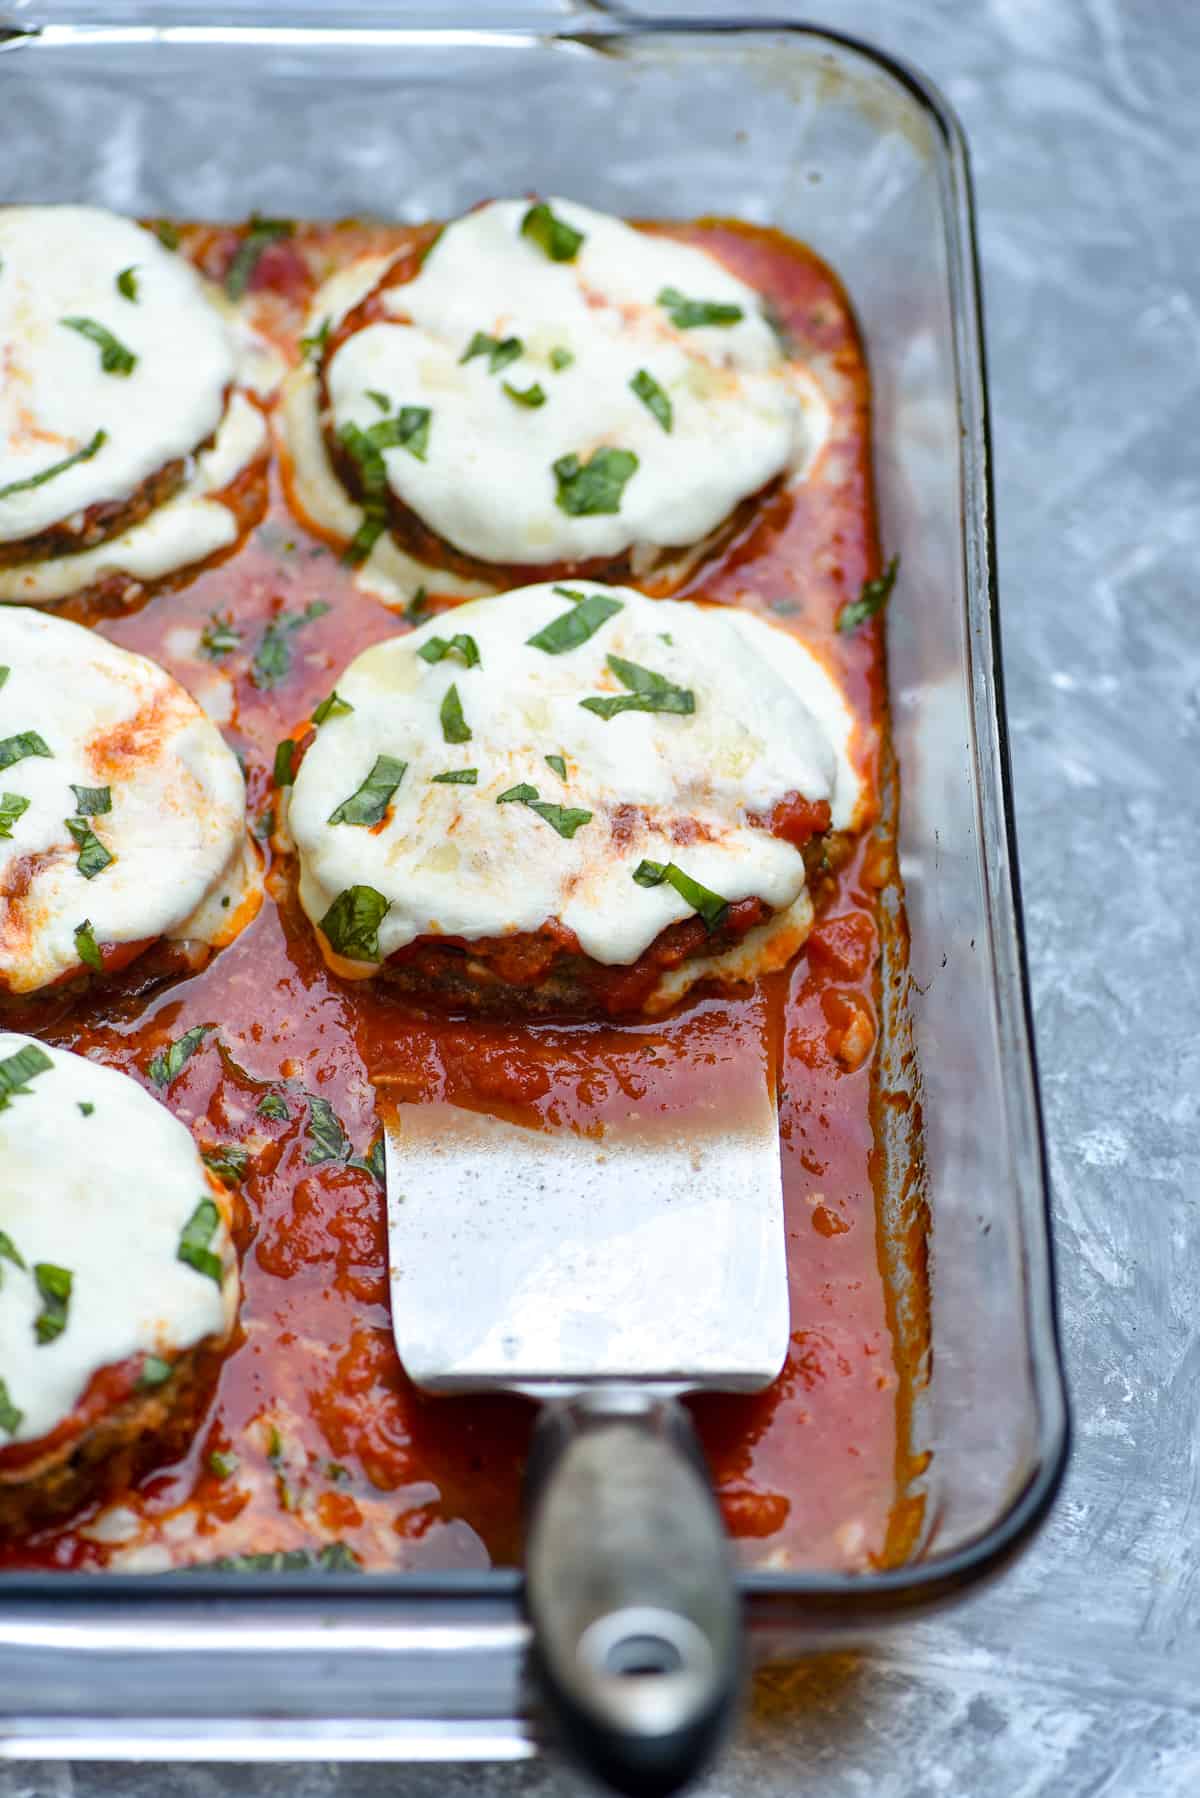 A spatula resting in a baking dish filled with eggplant parmesan.